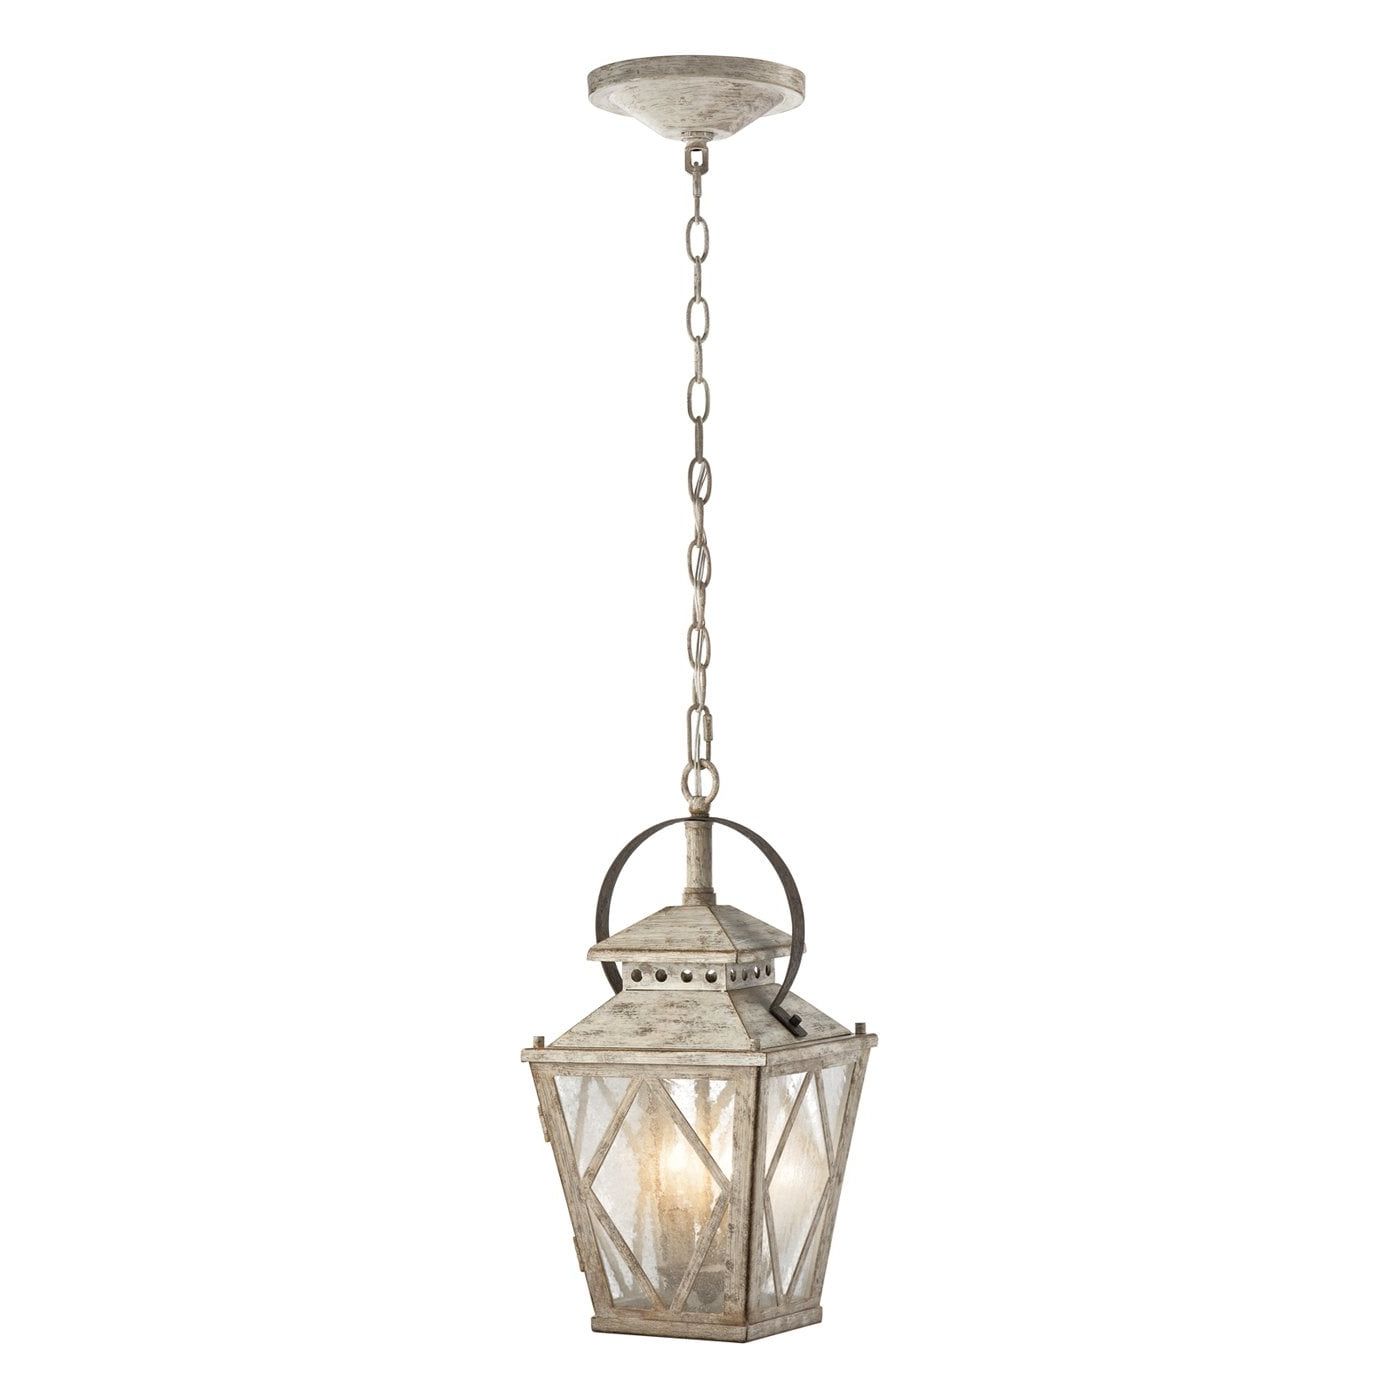 Newest White Distressed Lantern Chandeliers Intended For Kichler Hayman Bay 2 Light Distressed Antique White Traditional Seeded  Glass Lantern Mini Pendant Light In The Pendant Lighting Department At  Lowes (View 13 of 15)